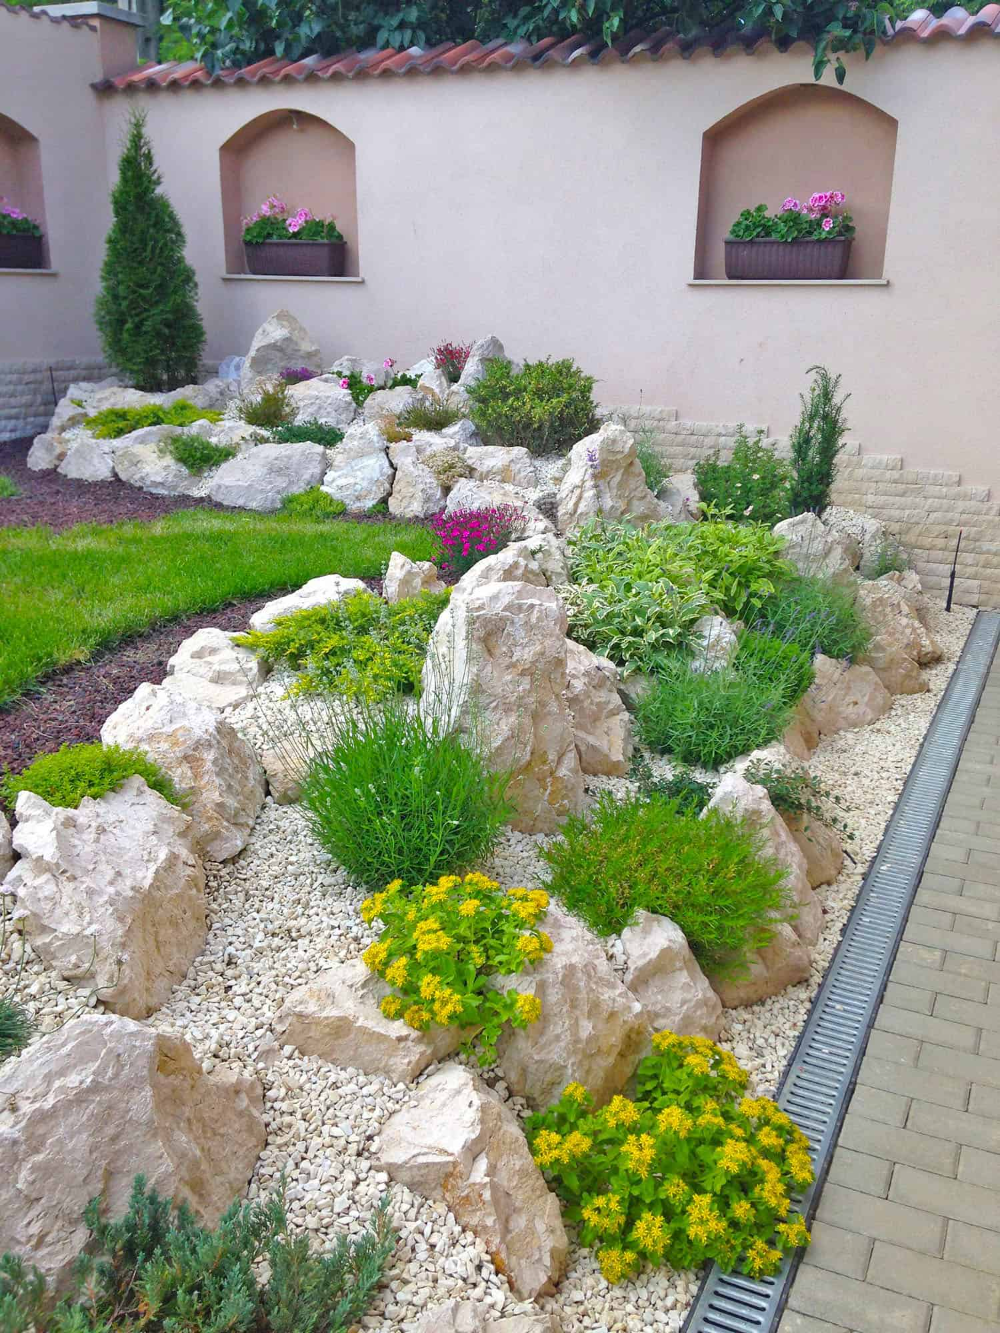 Creating Beautiful Outdoor Spaces with Rocks in Landscaping